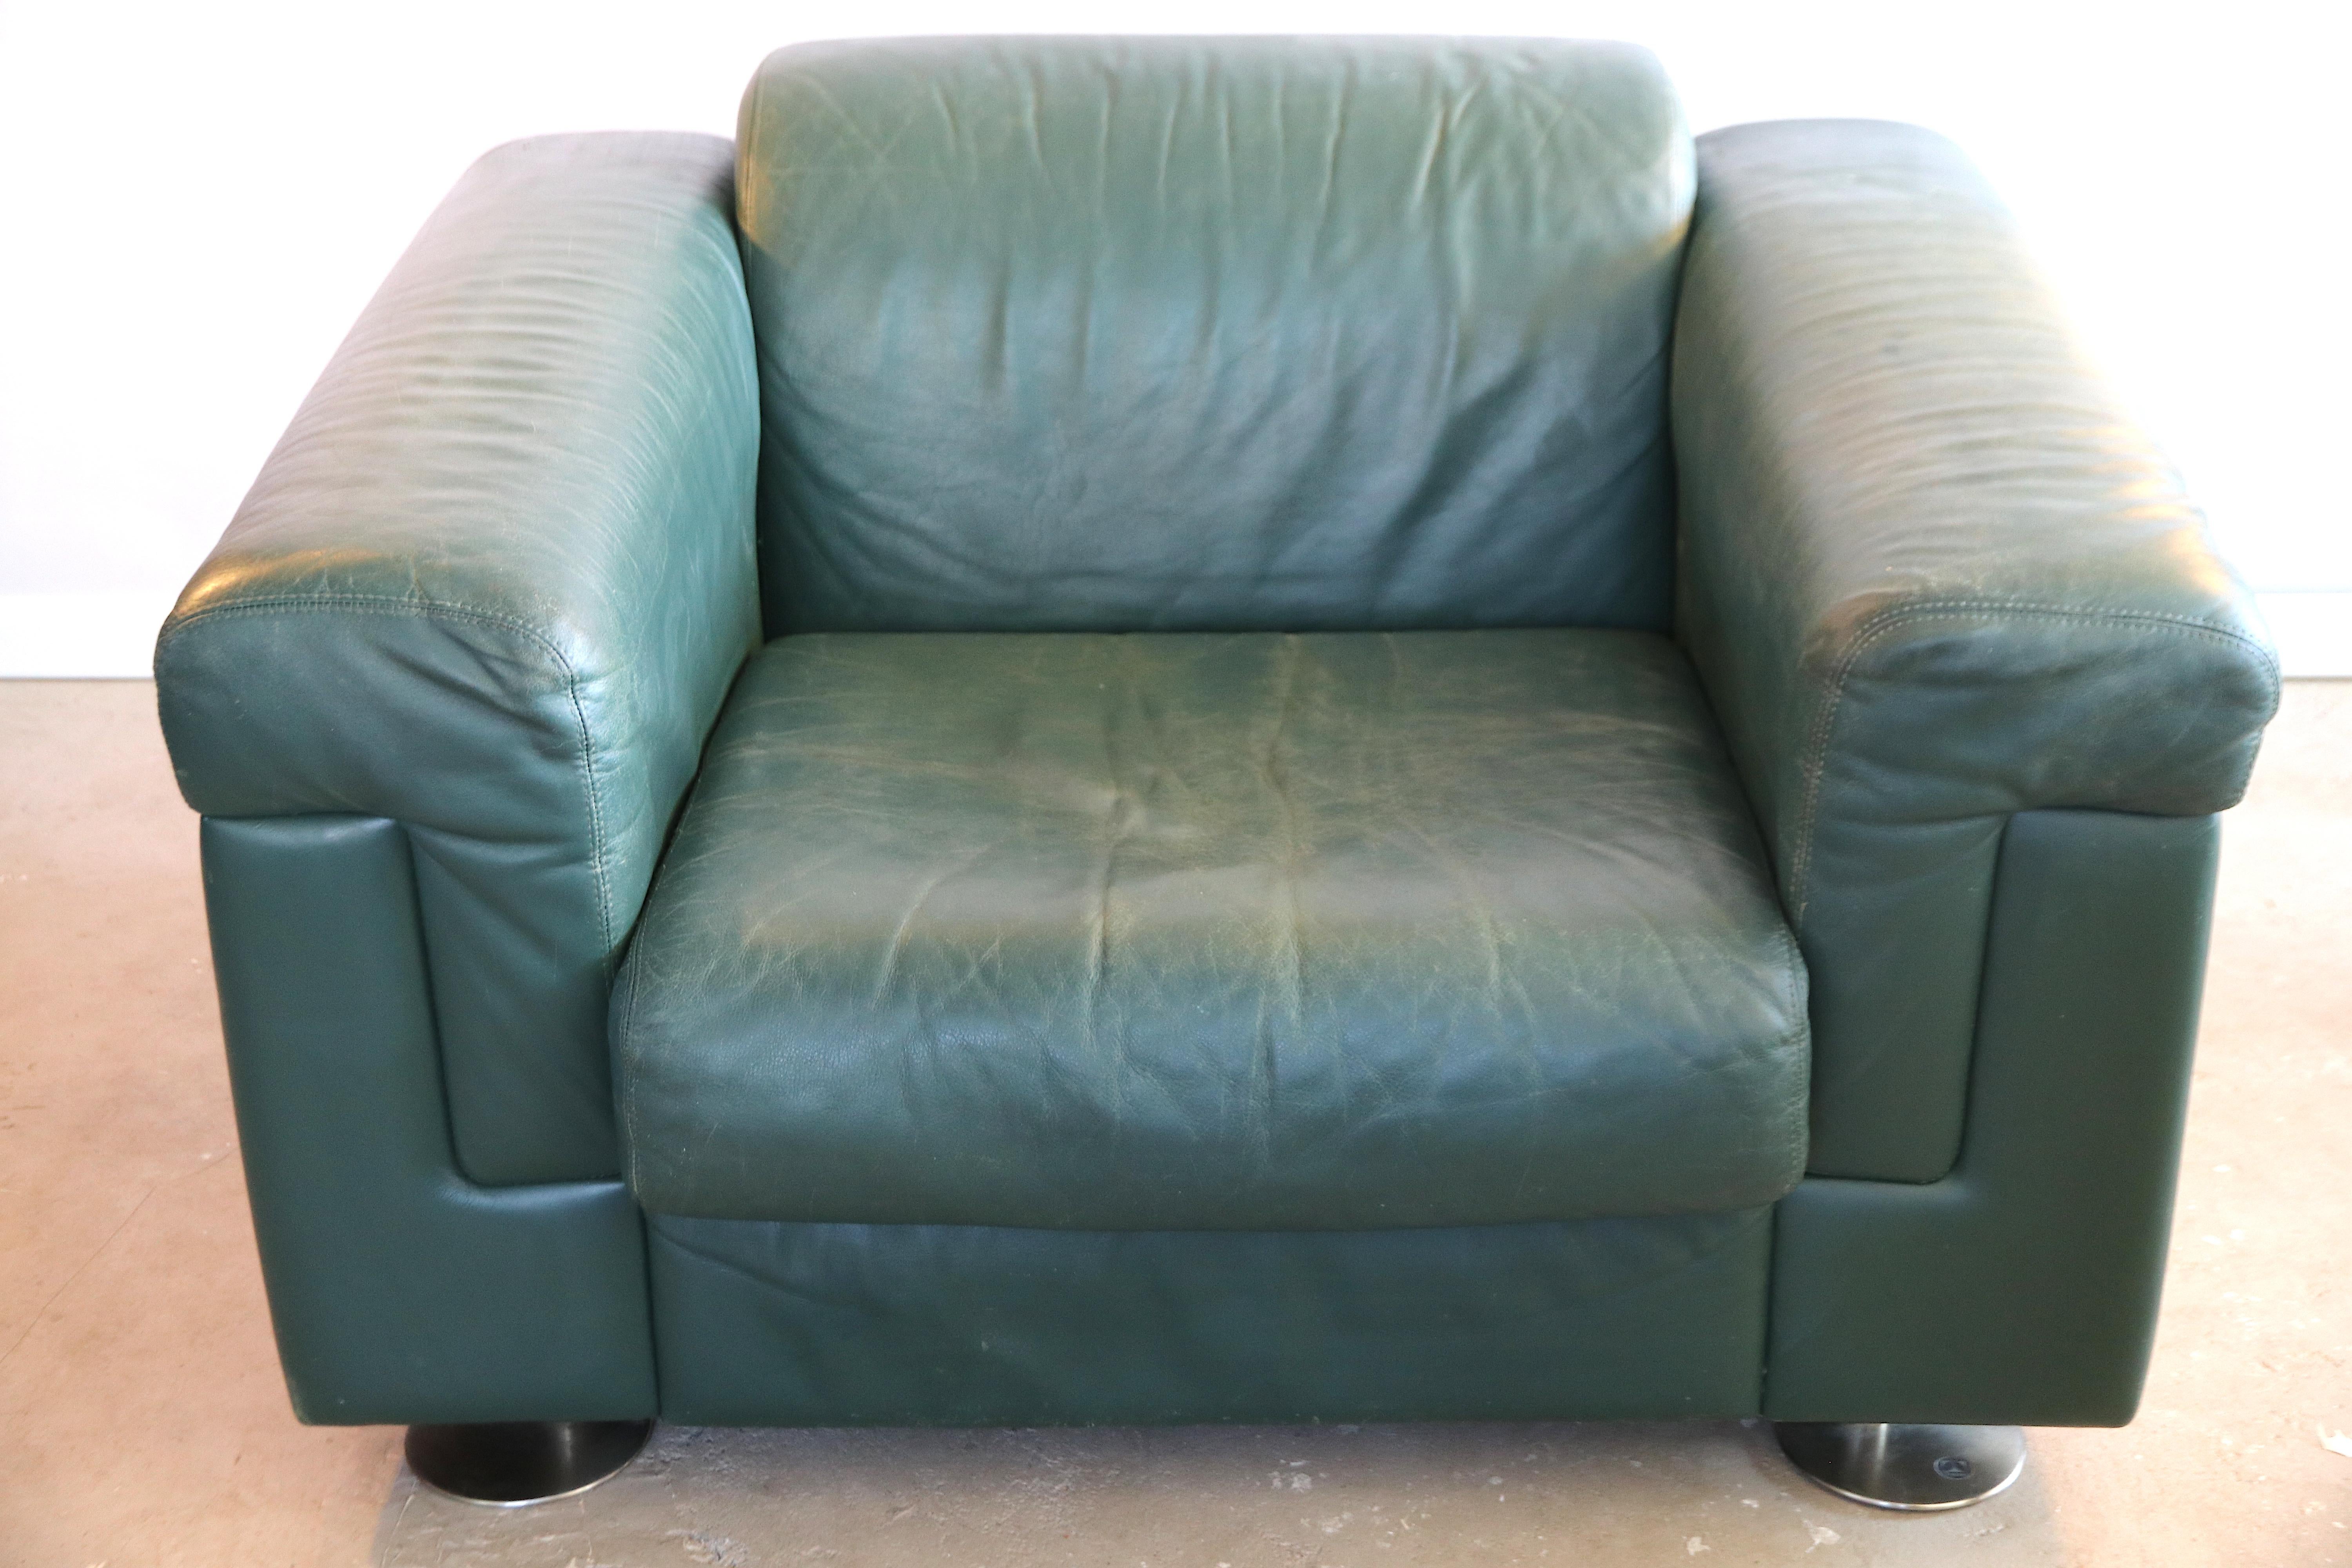 Very rare lounge or armchair of the D120 seating line designed by Valeria Borsani (the daughter of) and Alfredo Bonetti for the Tecno Company. The chair is fitted with a highly rare original green leather upholstery, in a good condition, though